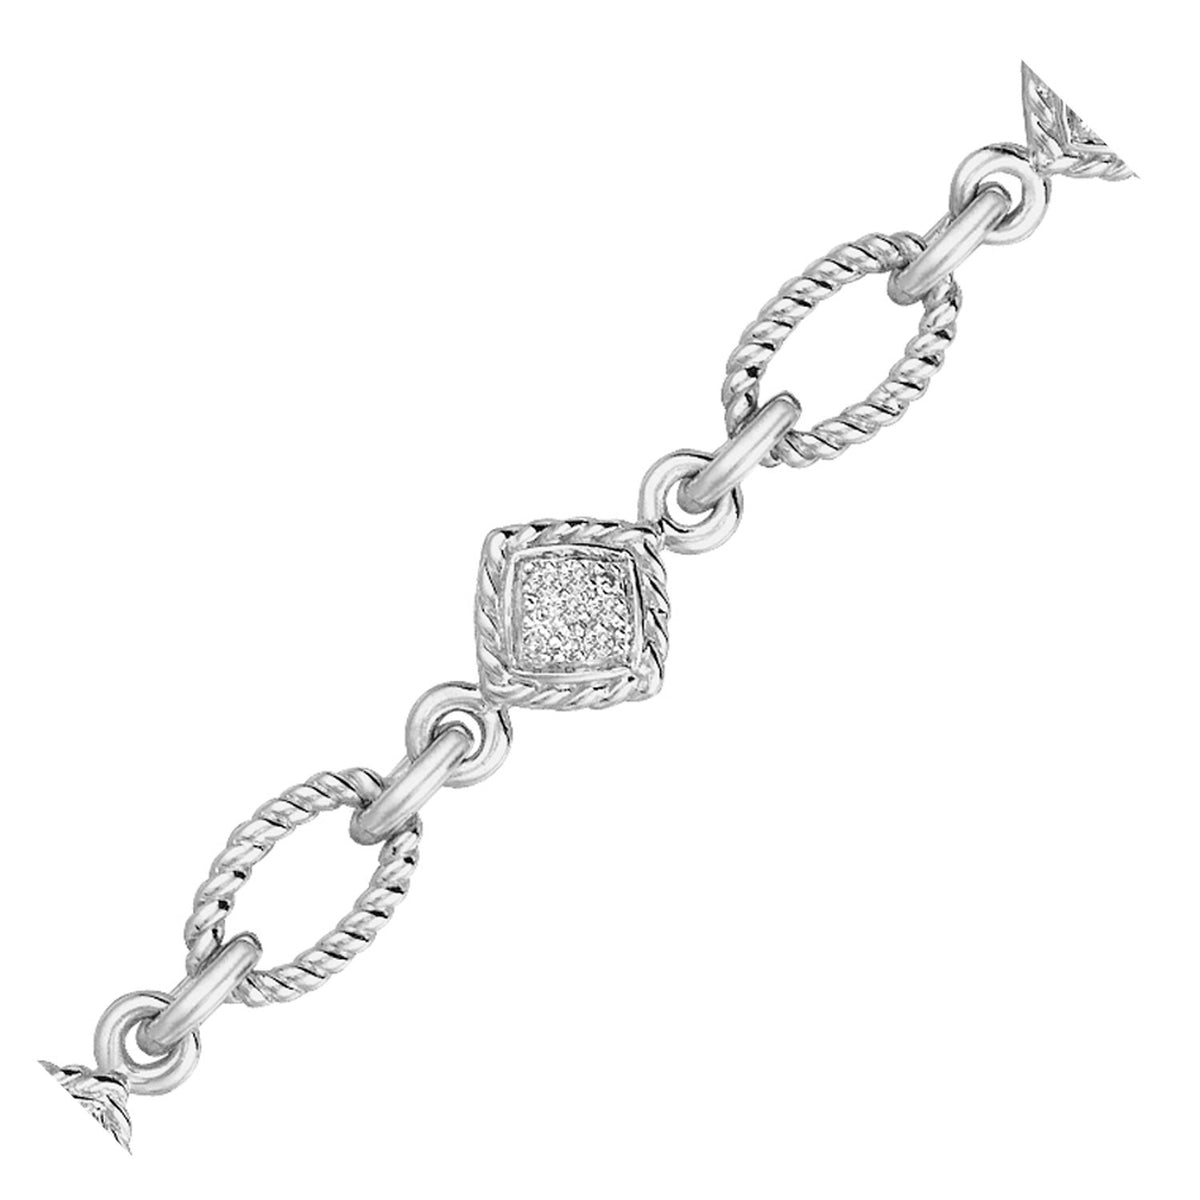 Cable Oval and Square Link Bracelet with Diamonds (1/4 cttw) - Sterling Silver